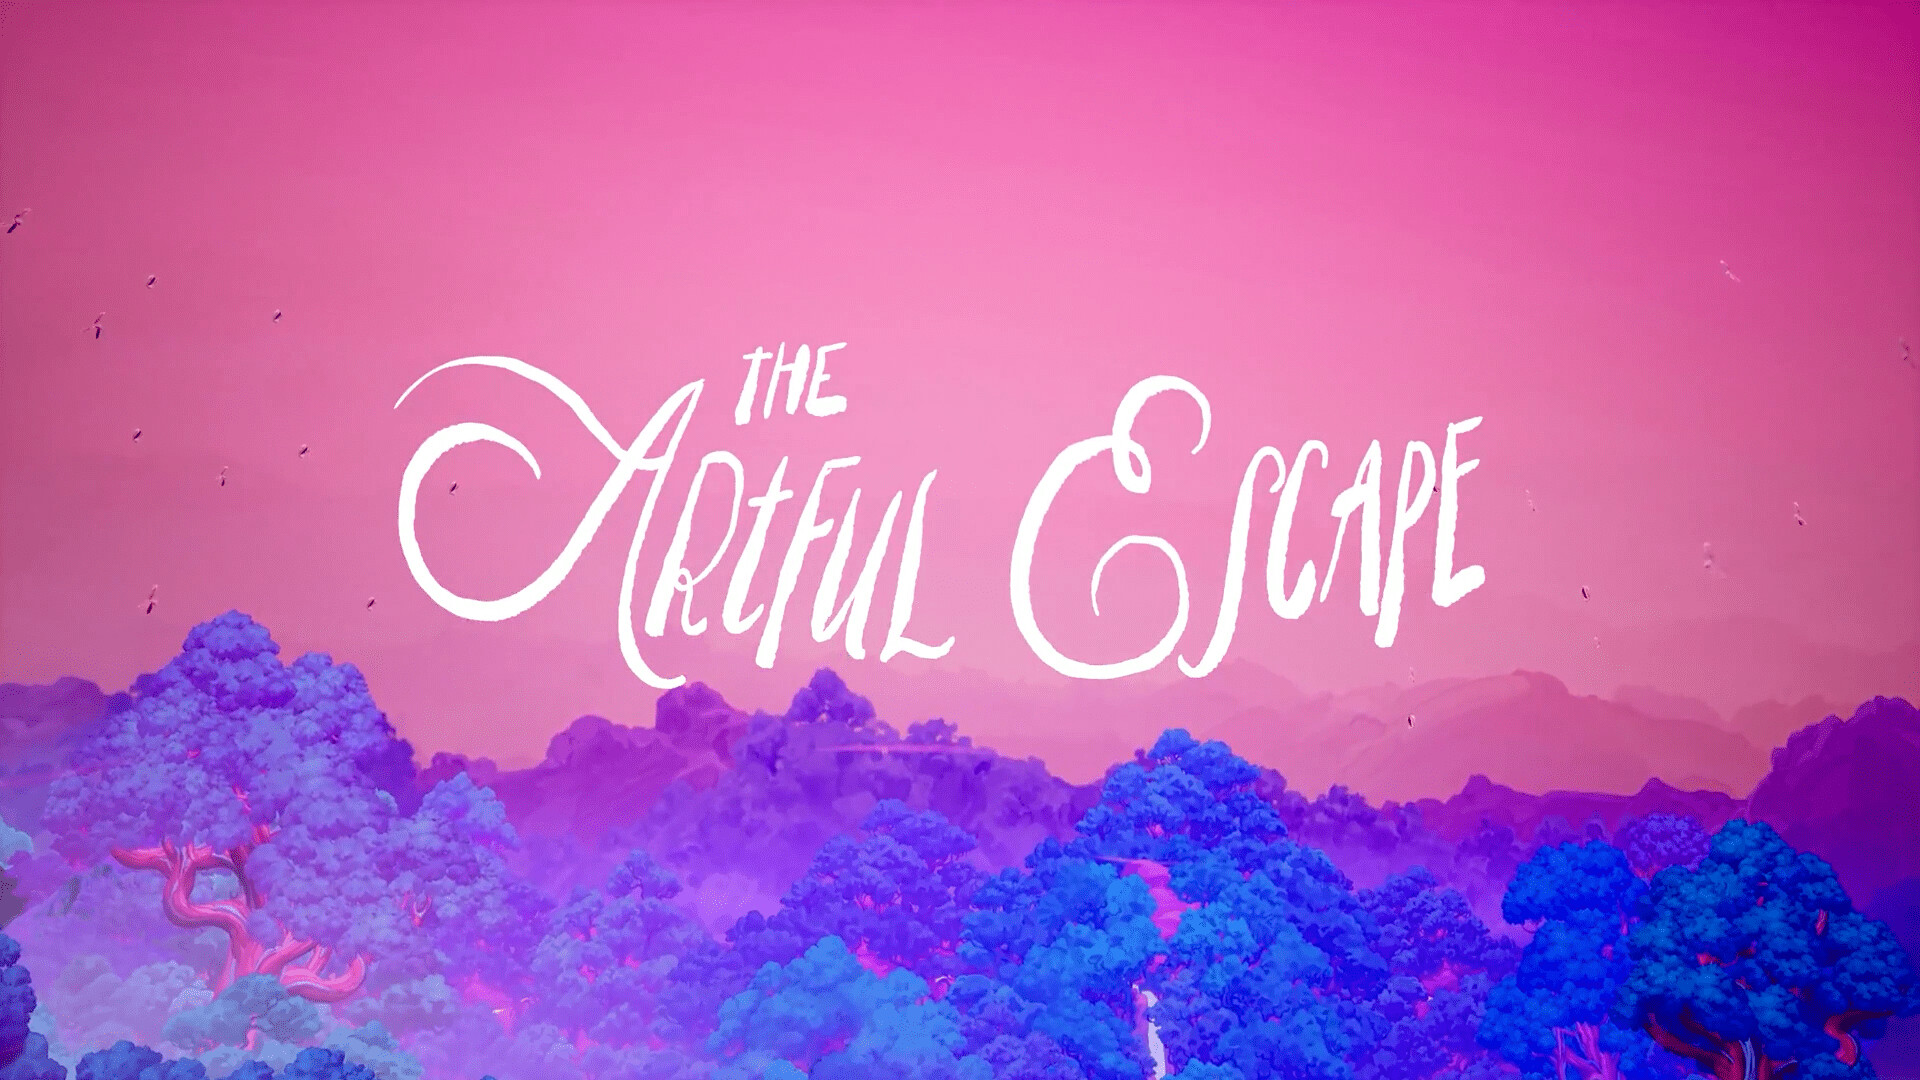 The Artful Escape: A touching tale of how to break free of the creative expectations of others. 1920x1080 Full HD Wallpaper.